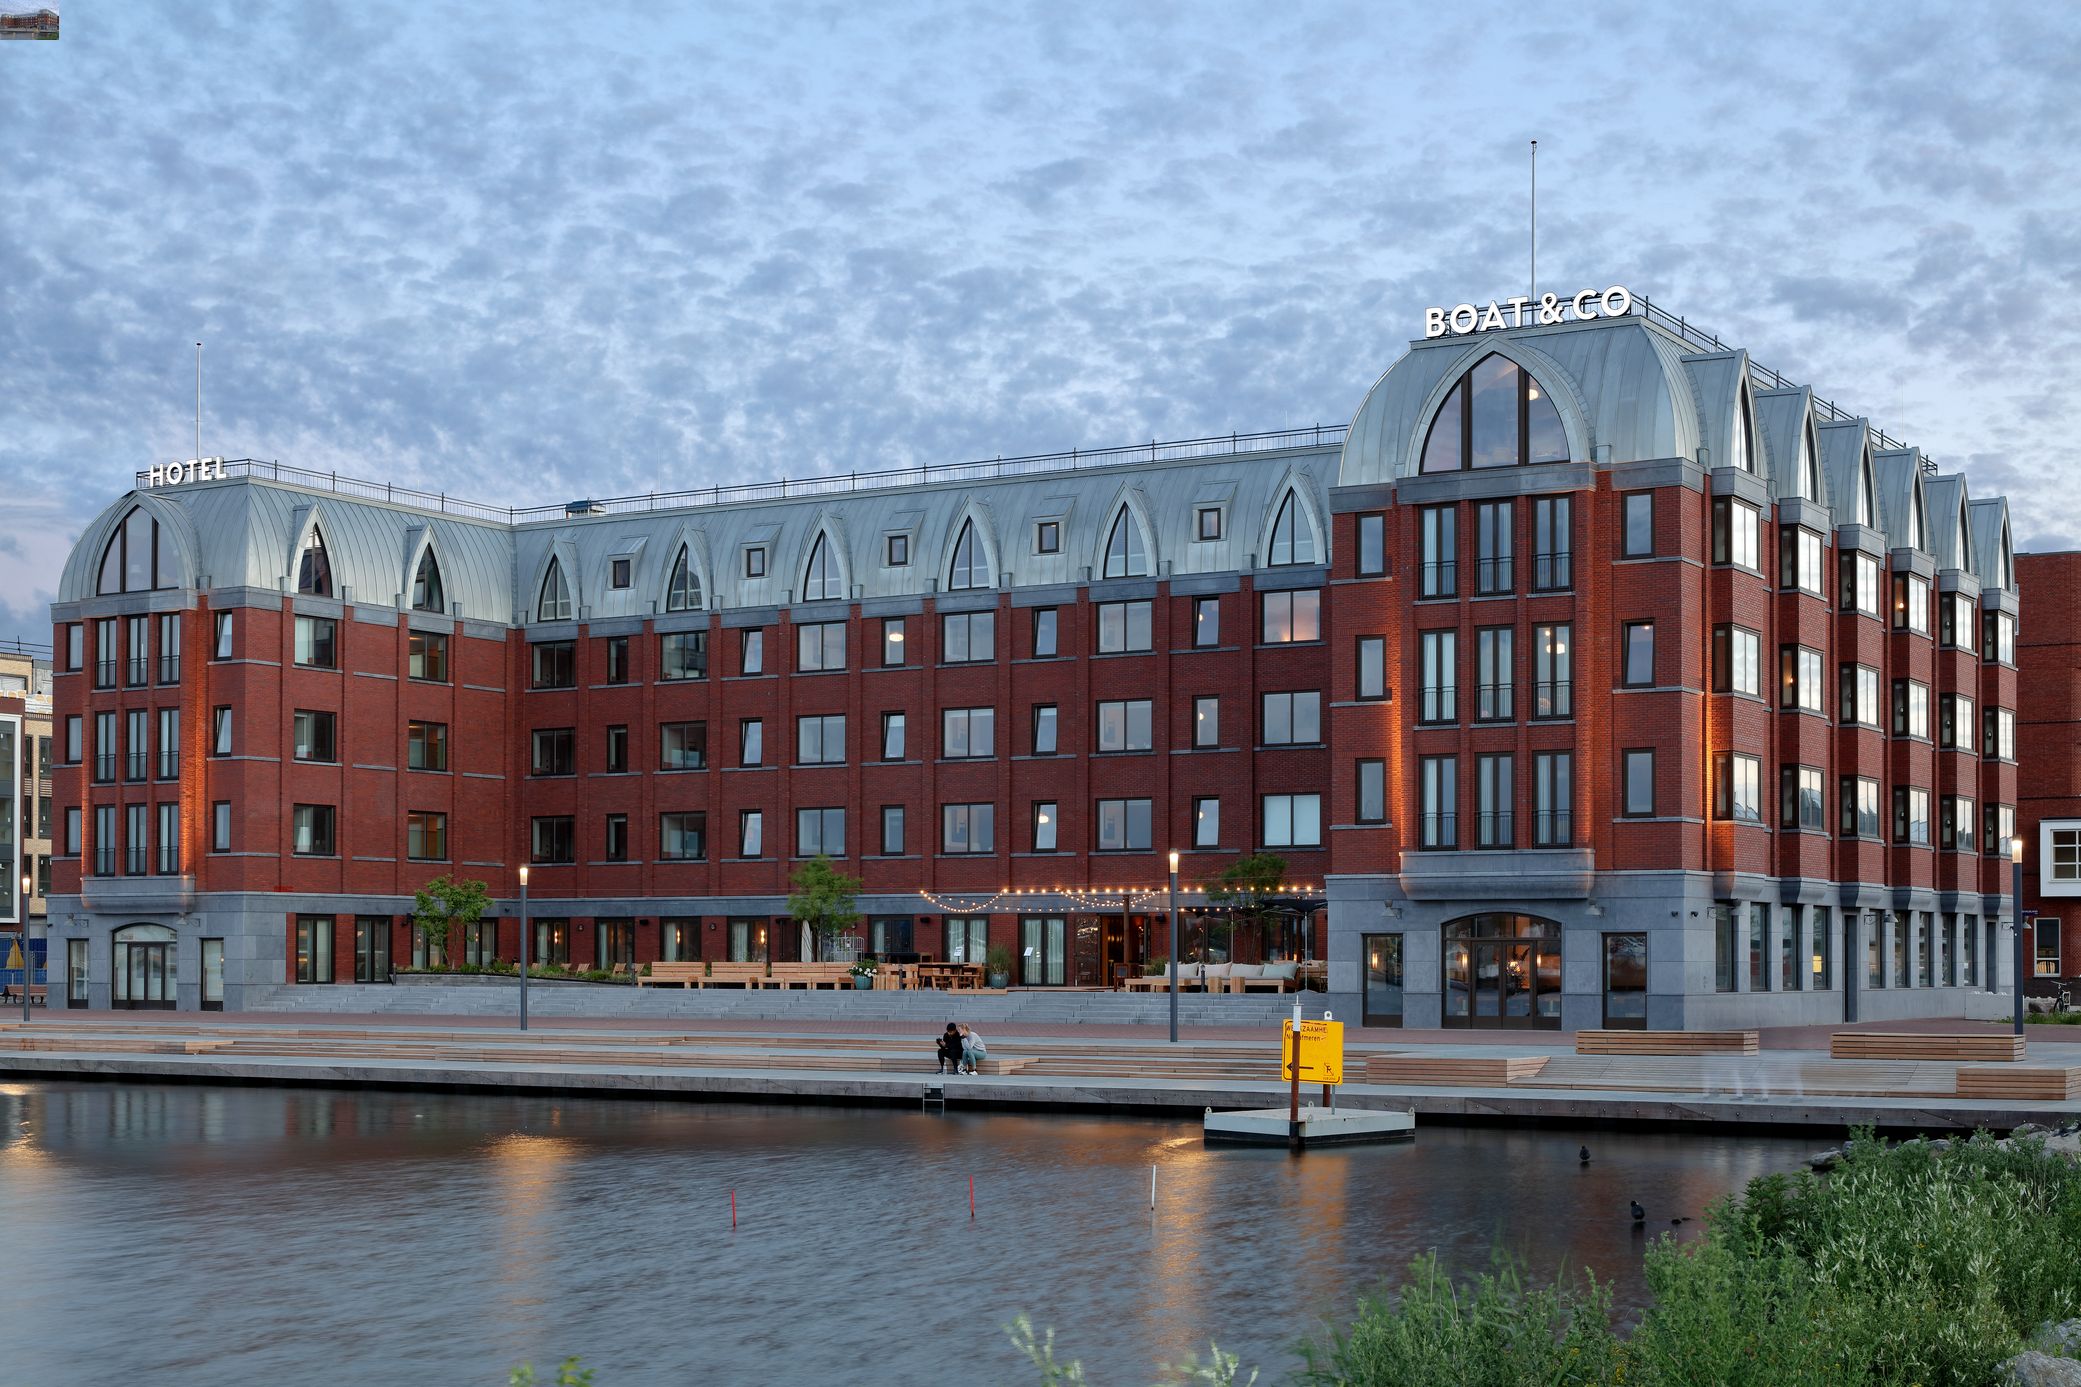 Hotel Boat & Co, Netherlands, C2C certified, roof: RHEINZINK-CLASSIC mill finish, double standing seam technology